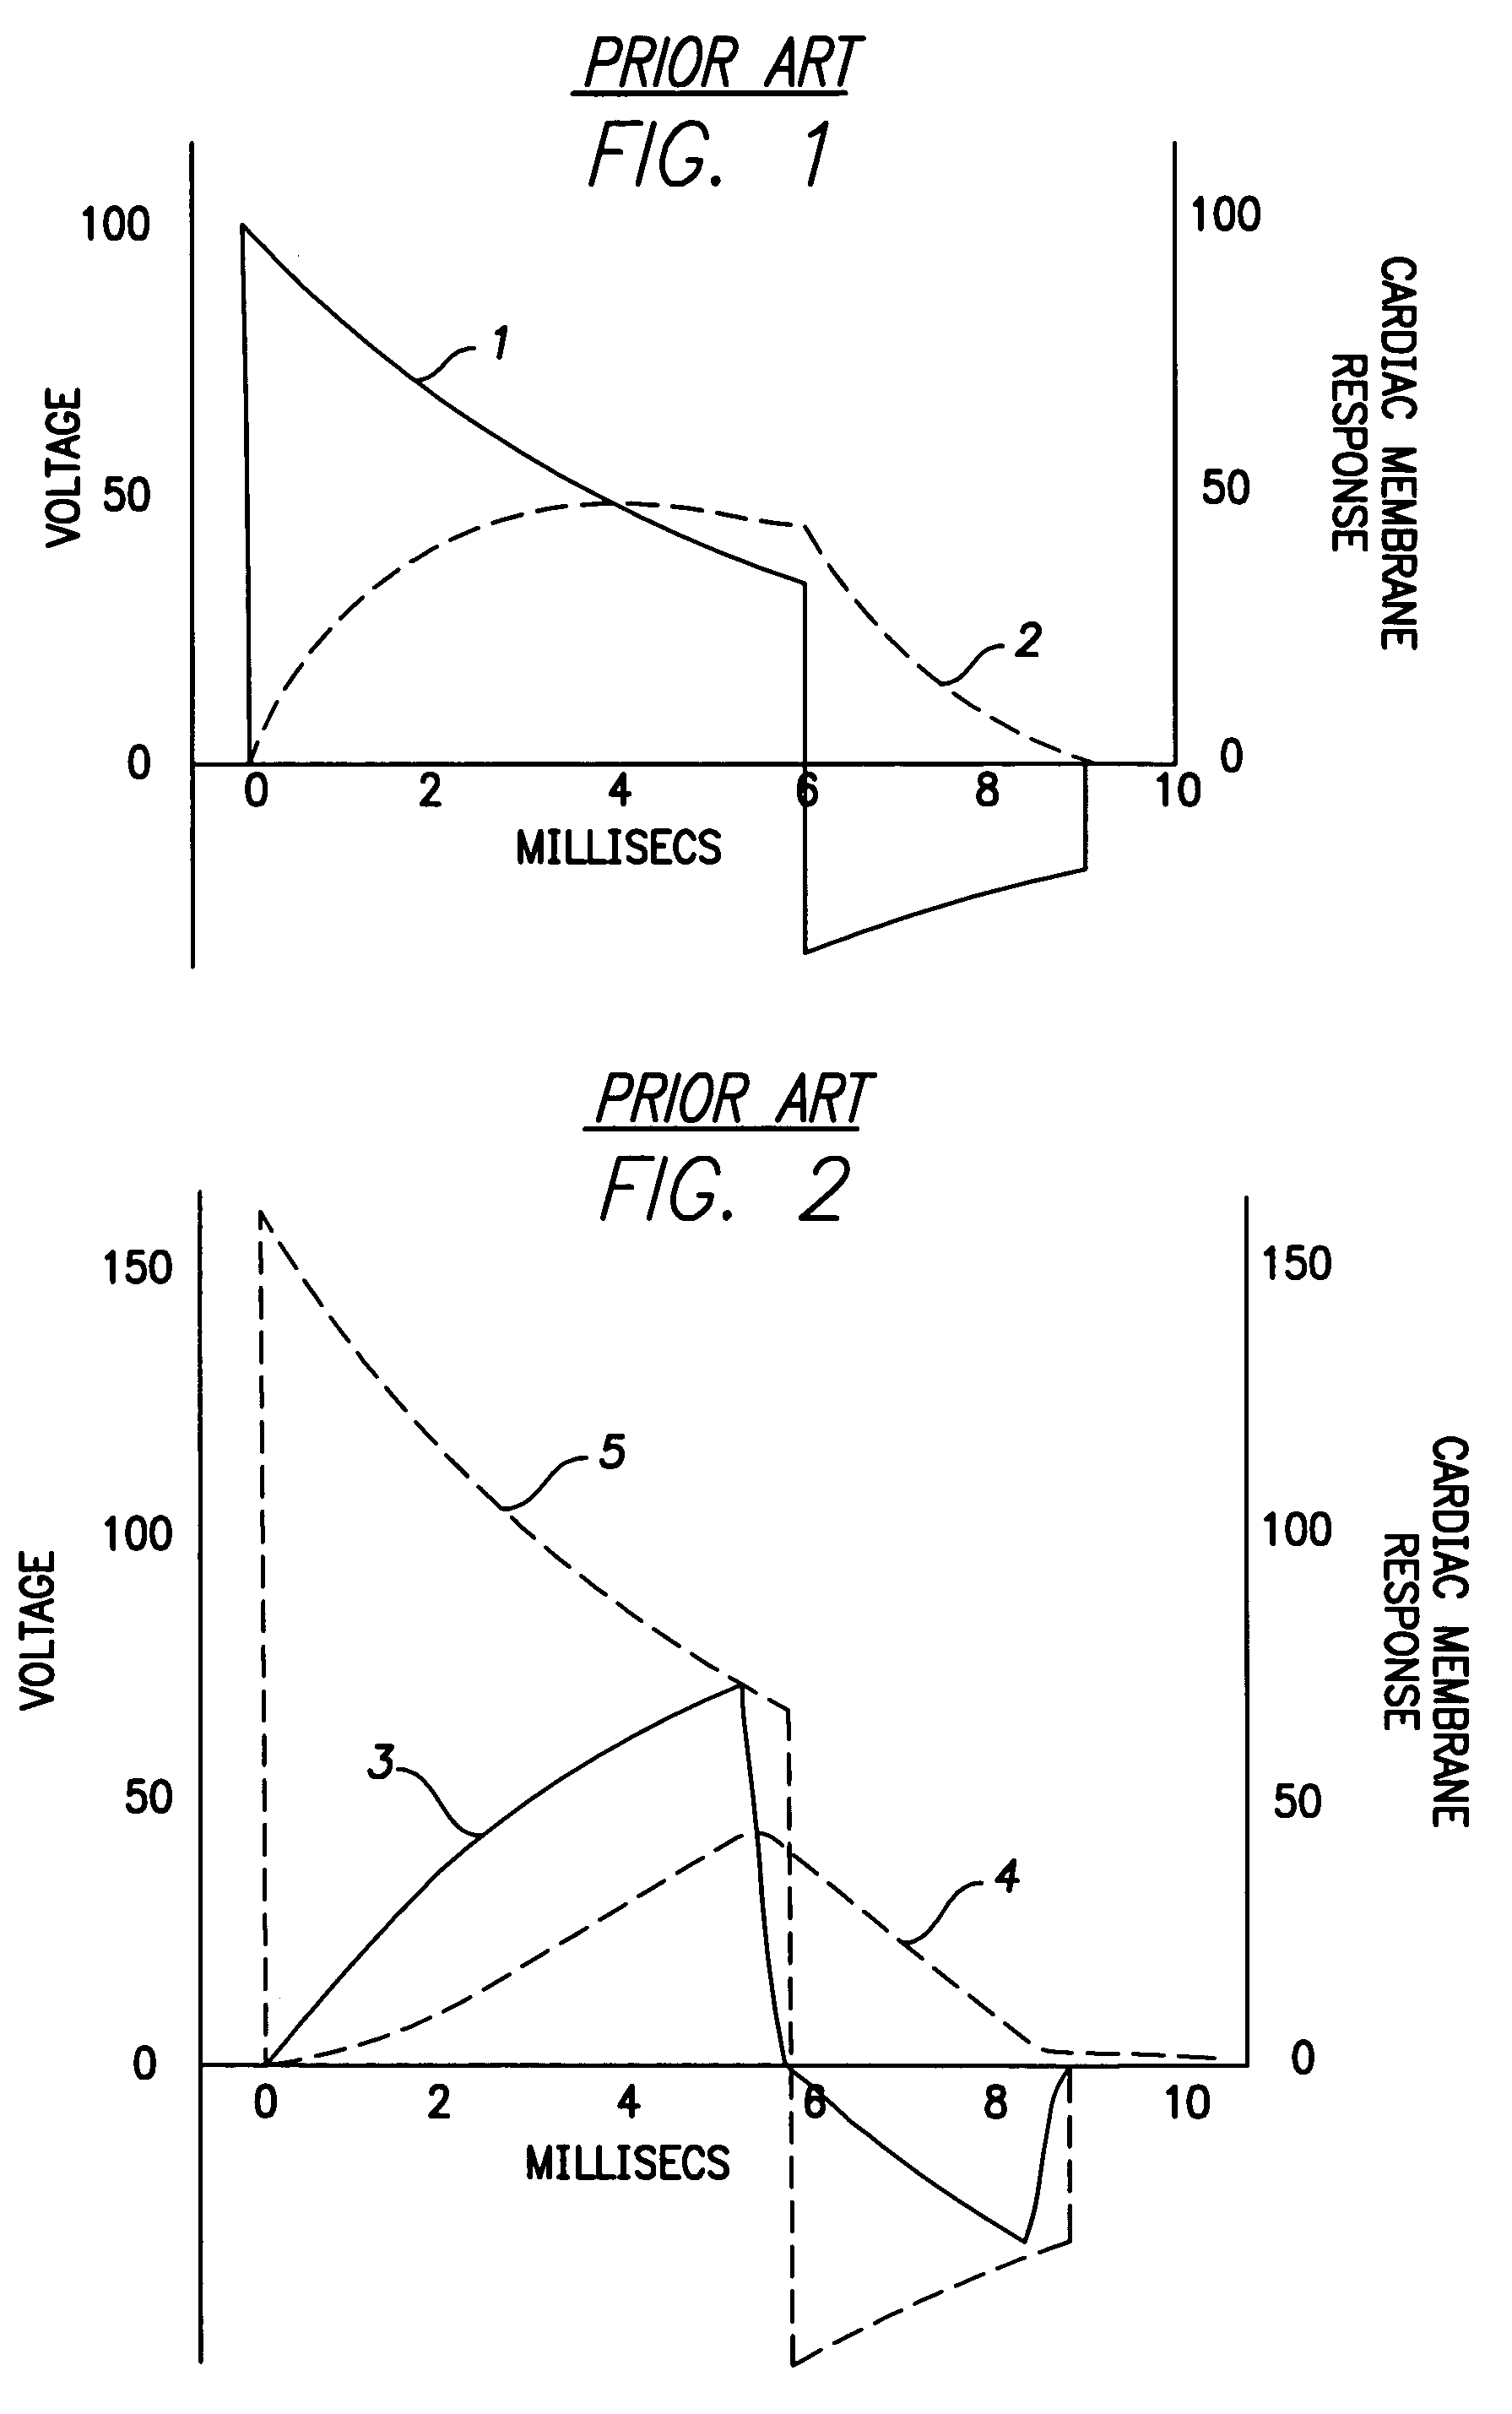 System and method for reducing pain associated with cardioversion shocks generated by implantable cardiac stimulation devices